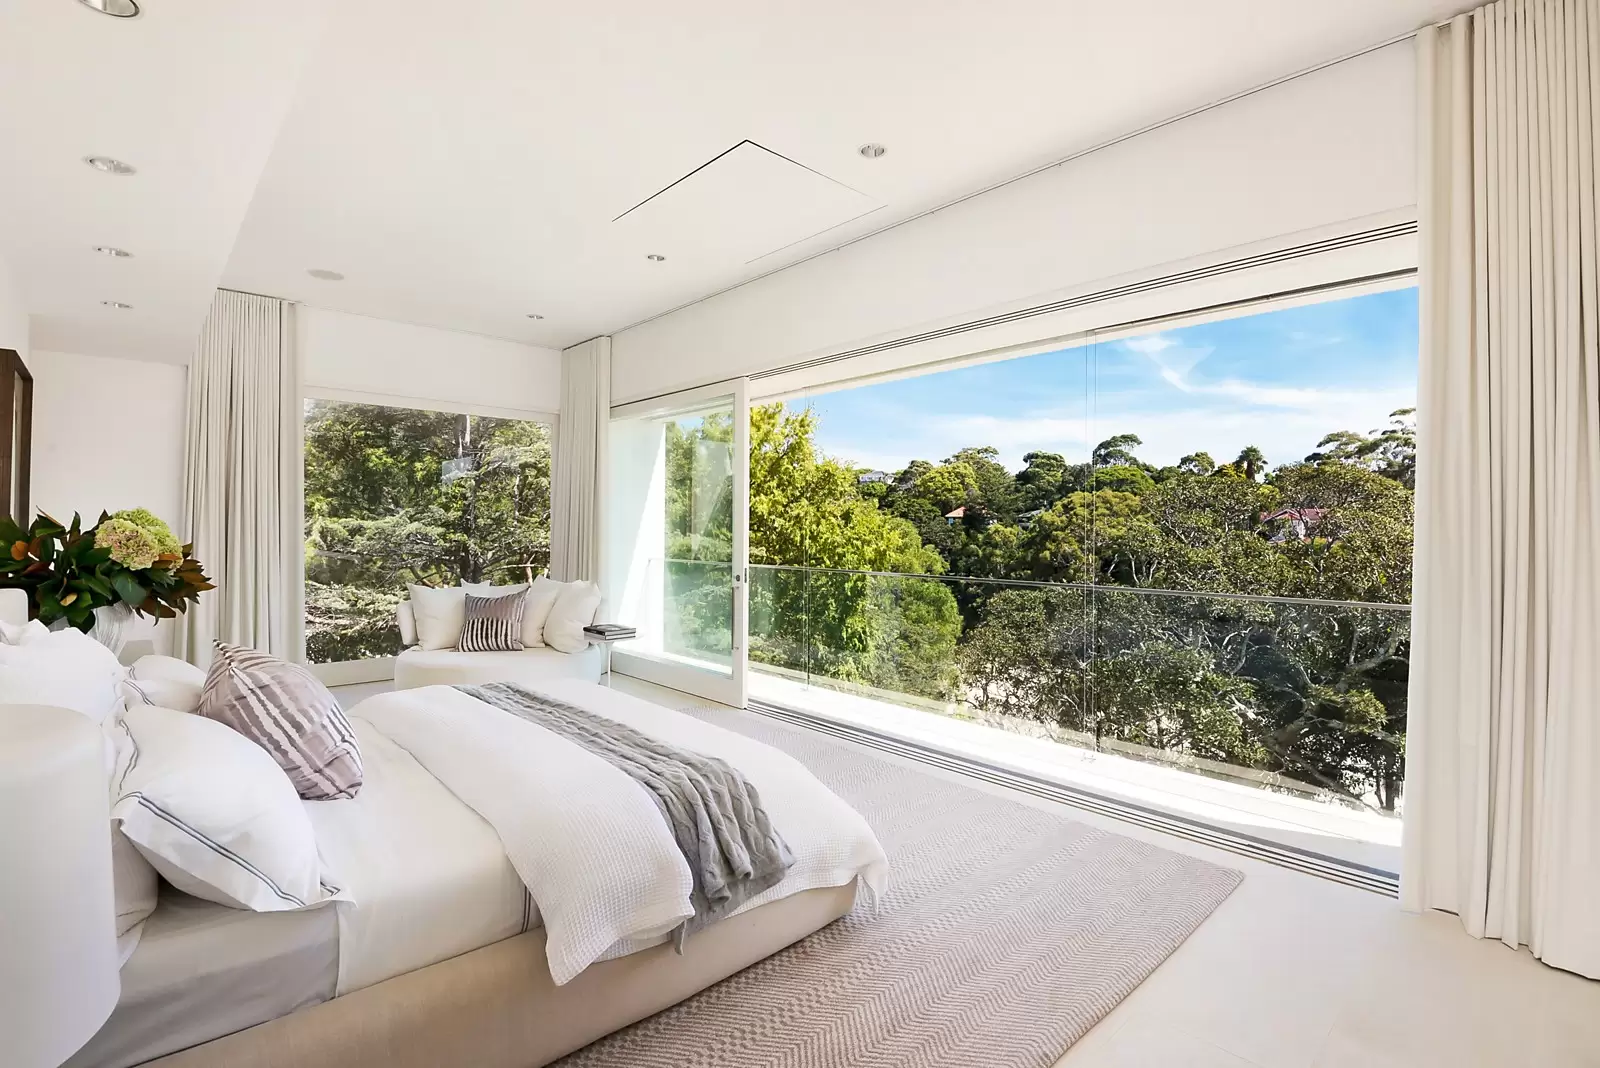 Photo #16: 10 The Crescent, Vaucluse - Sold by Sydney Sotheby's International Realty